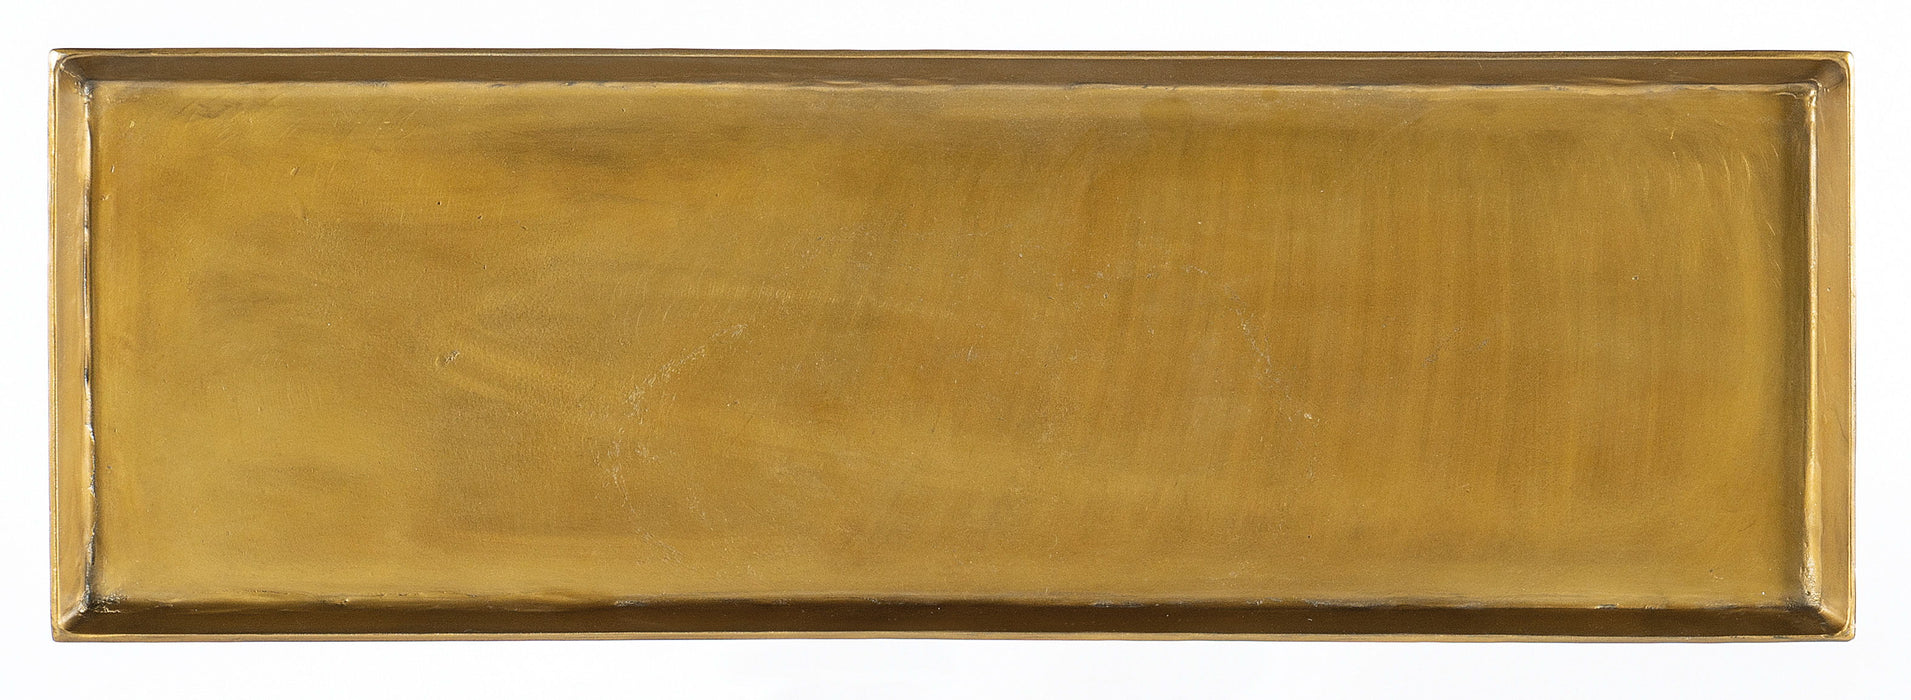 Commerce And Market Tray Top Metal Console